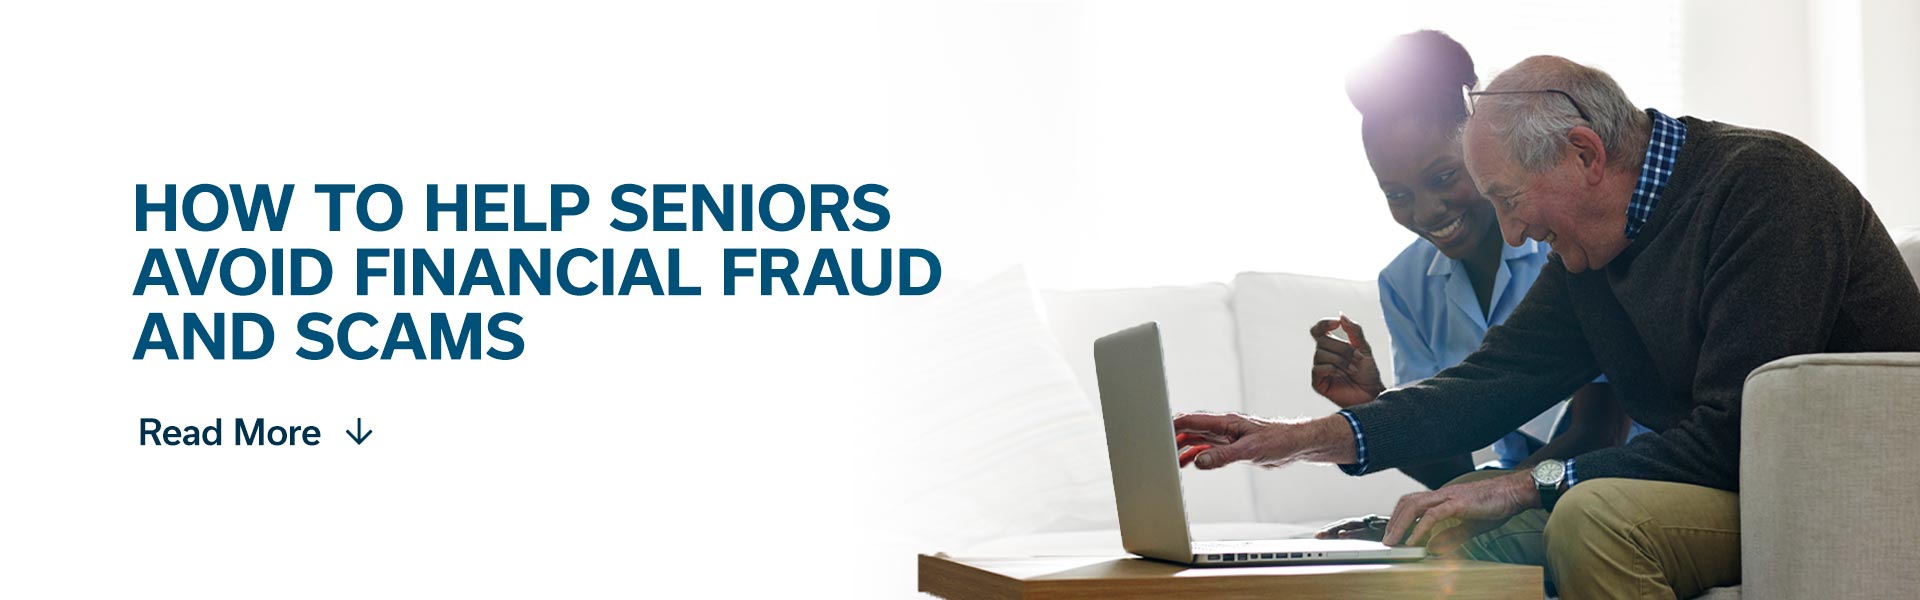 How to Help Seniors Avoid Financial Fraud and Scams